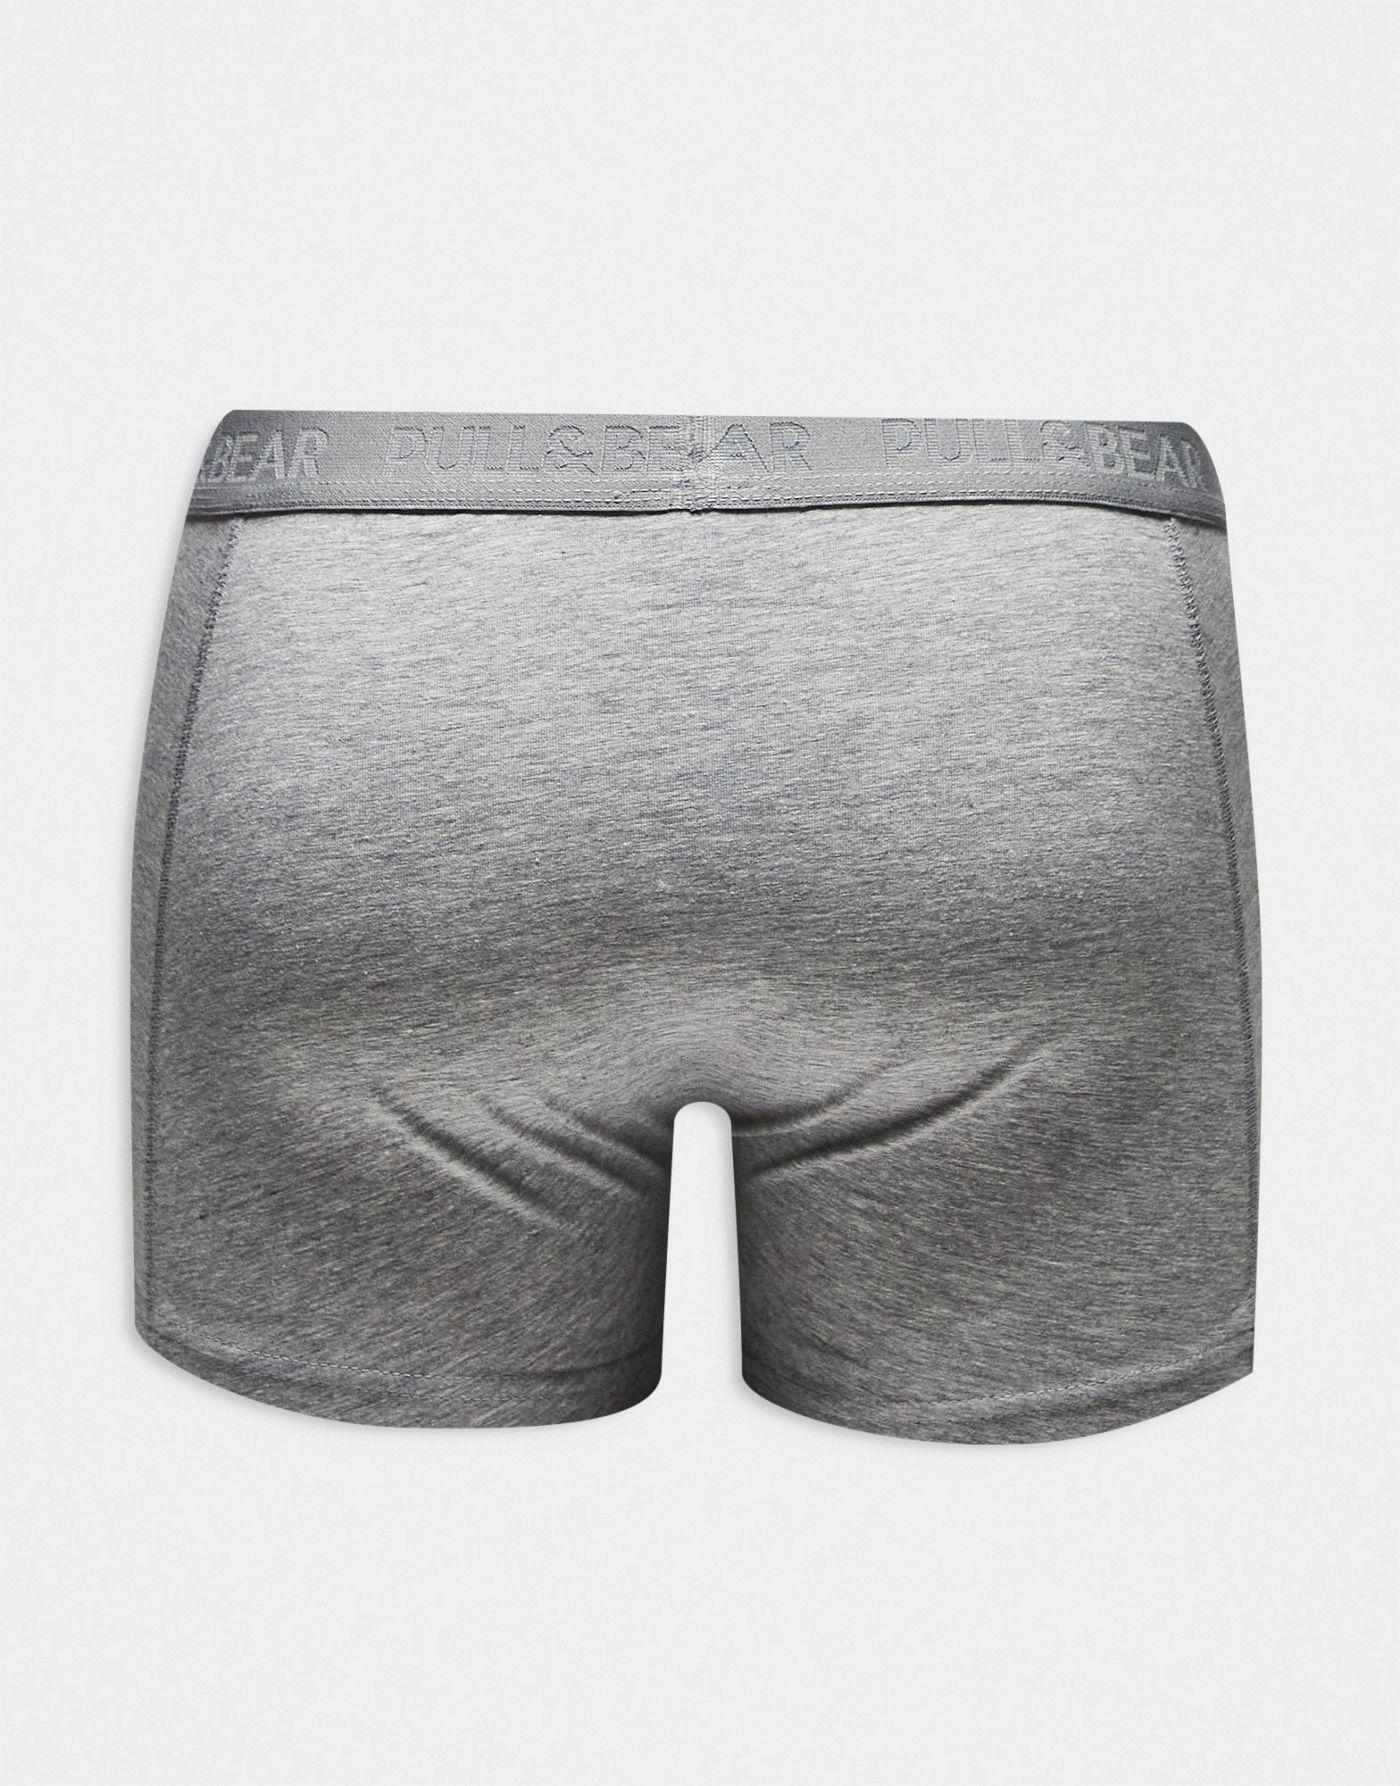 Pull&Bear 3 pack boxers with white/grey/black waistbands